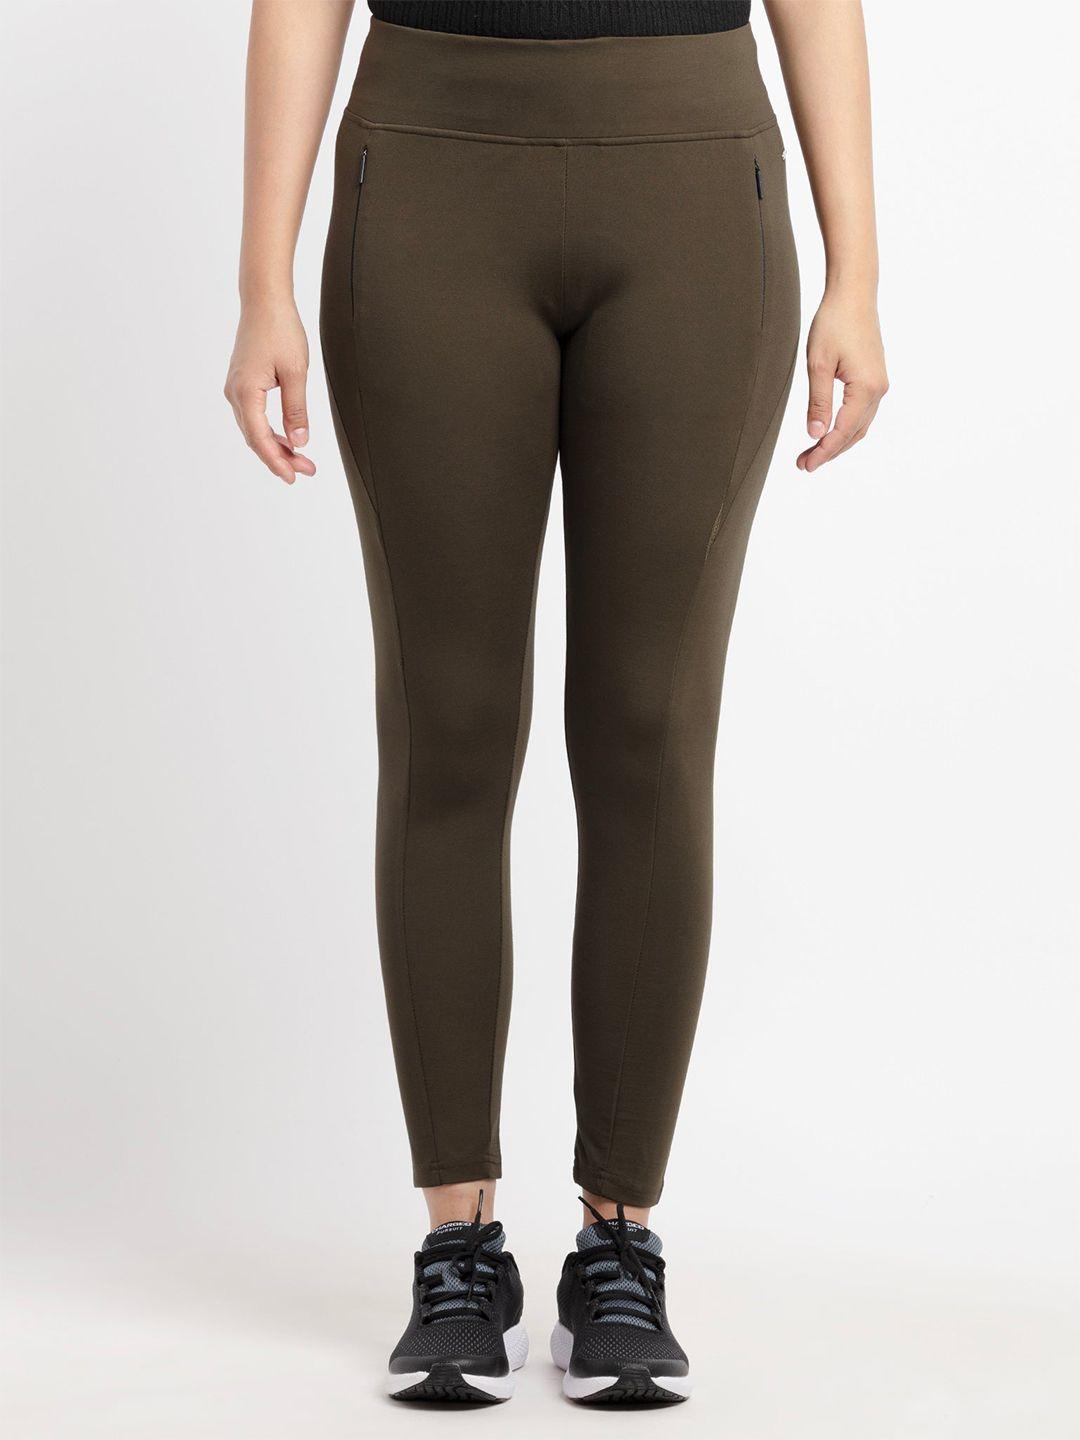 status quo olive solid  jeggings